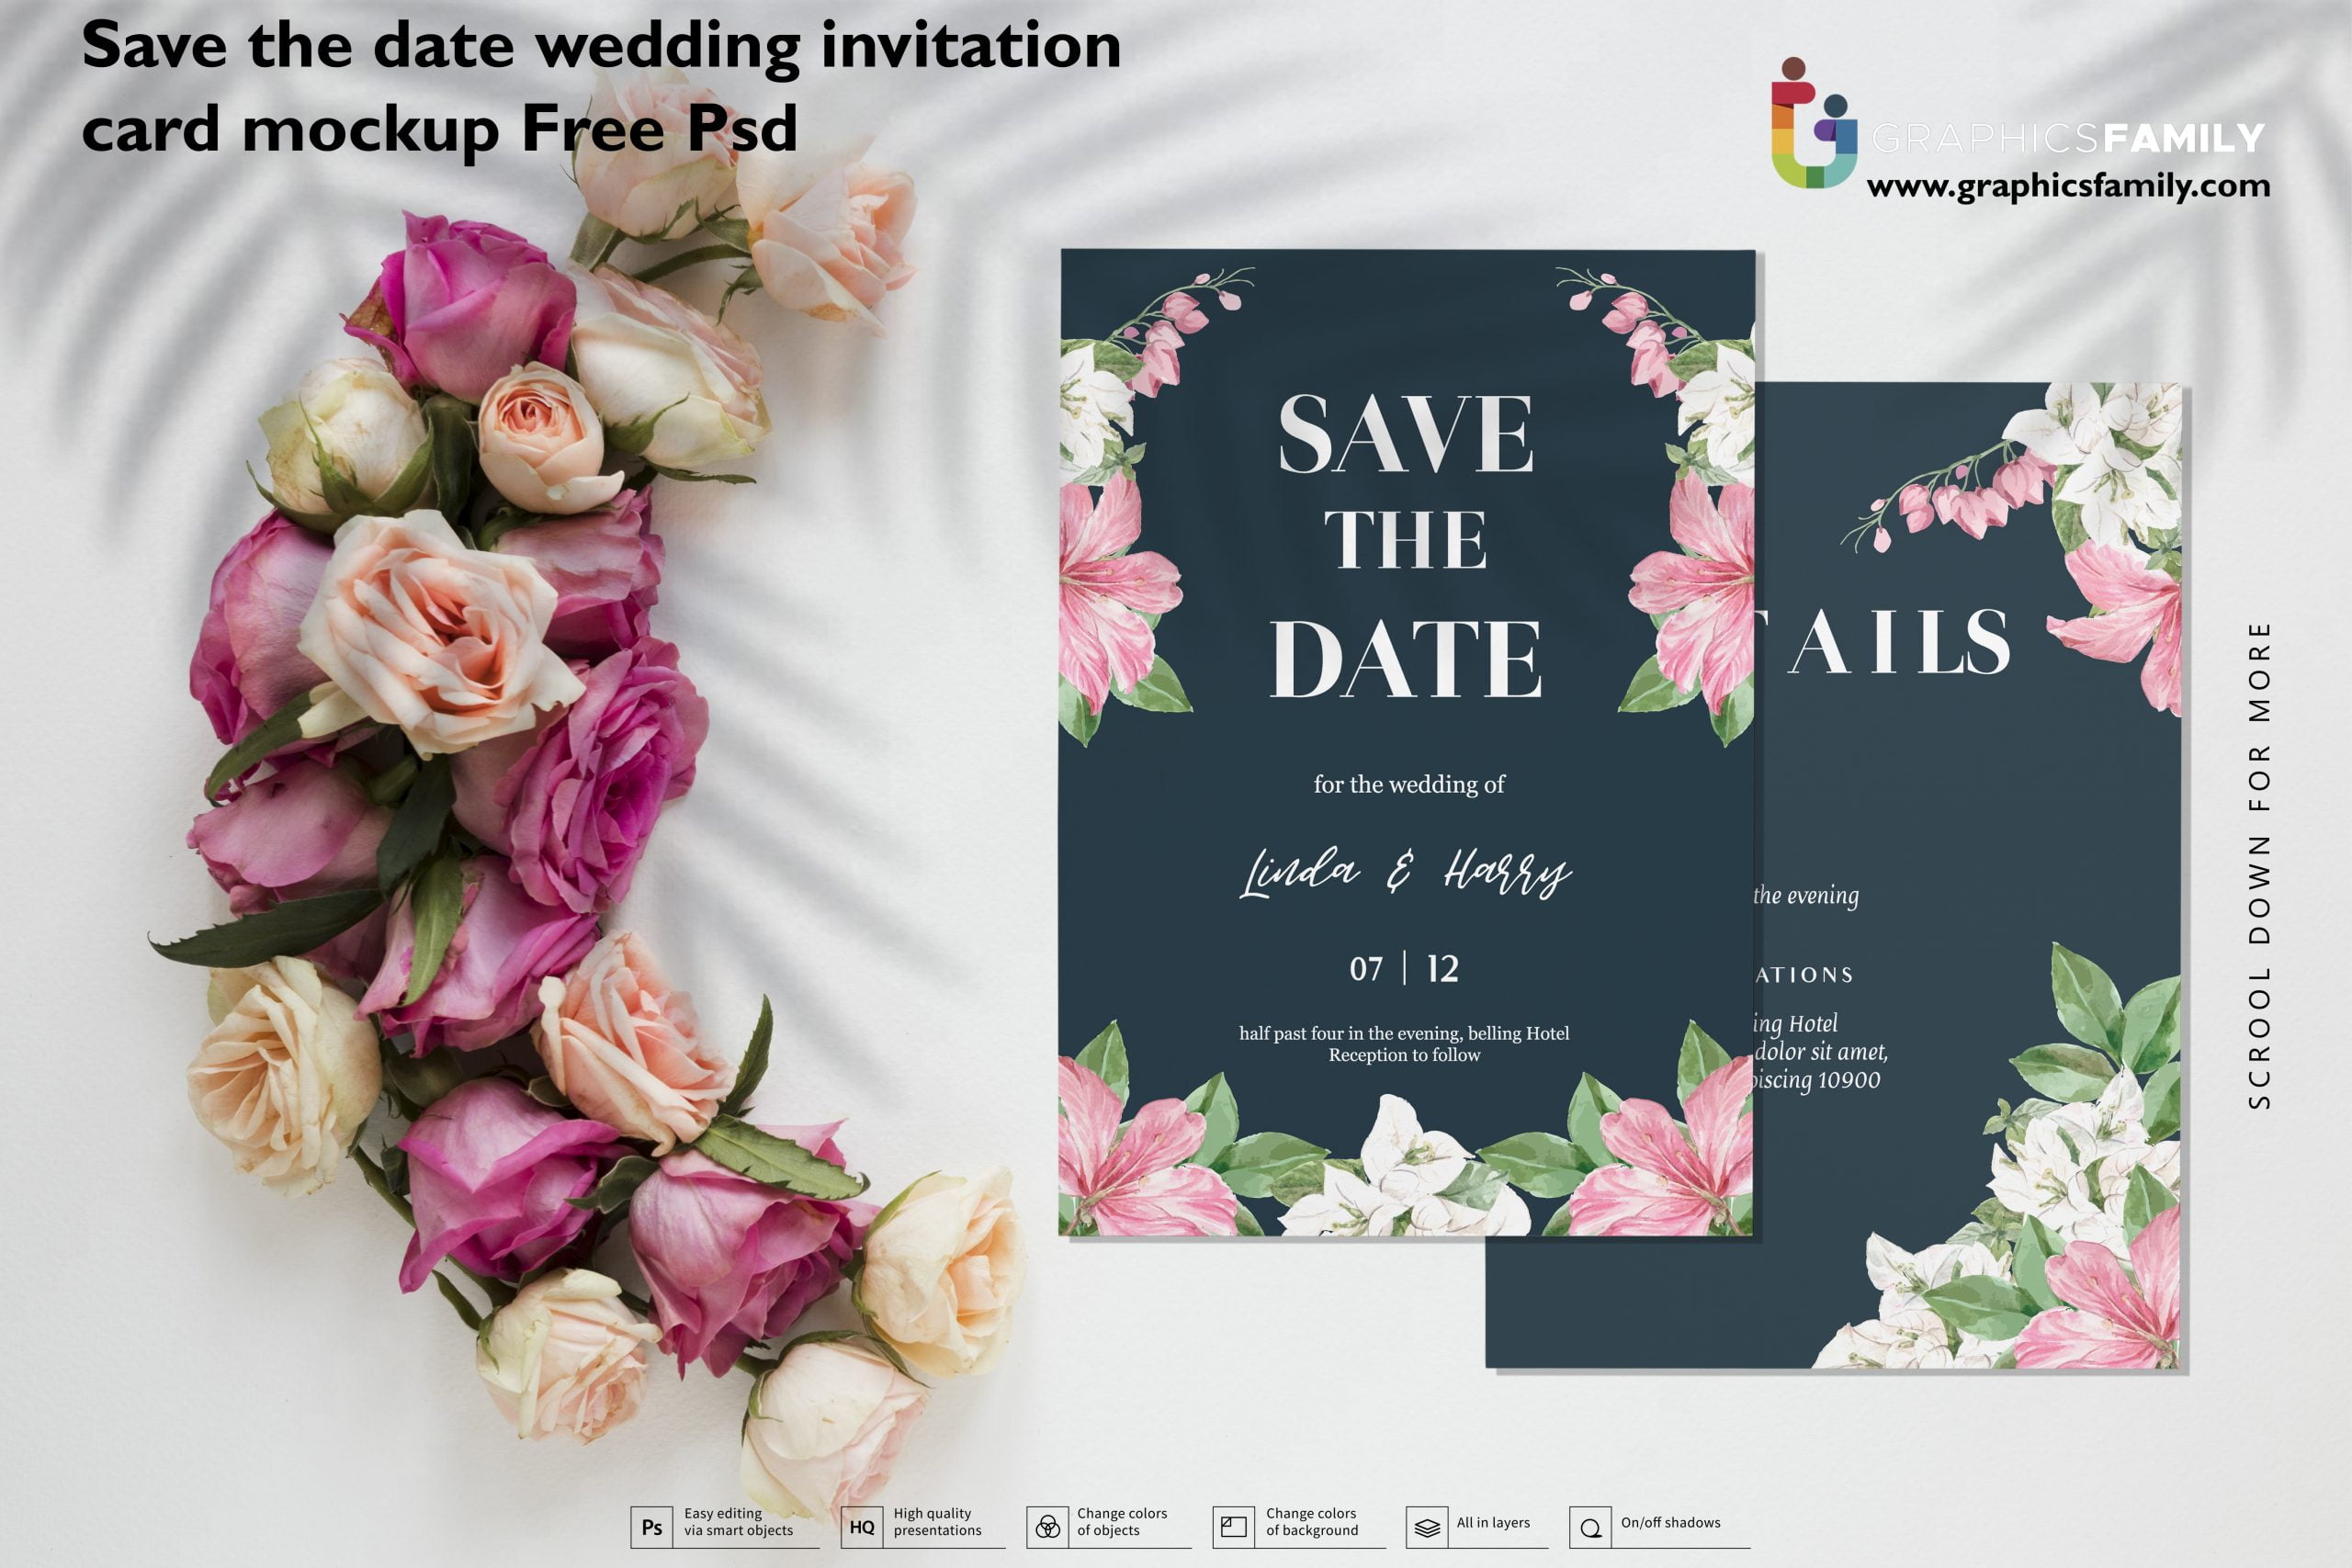 Save the date wedding invitation card mockup Free PSD GraphicsFamily